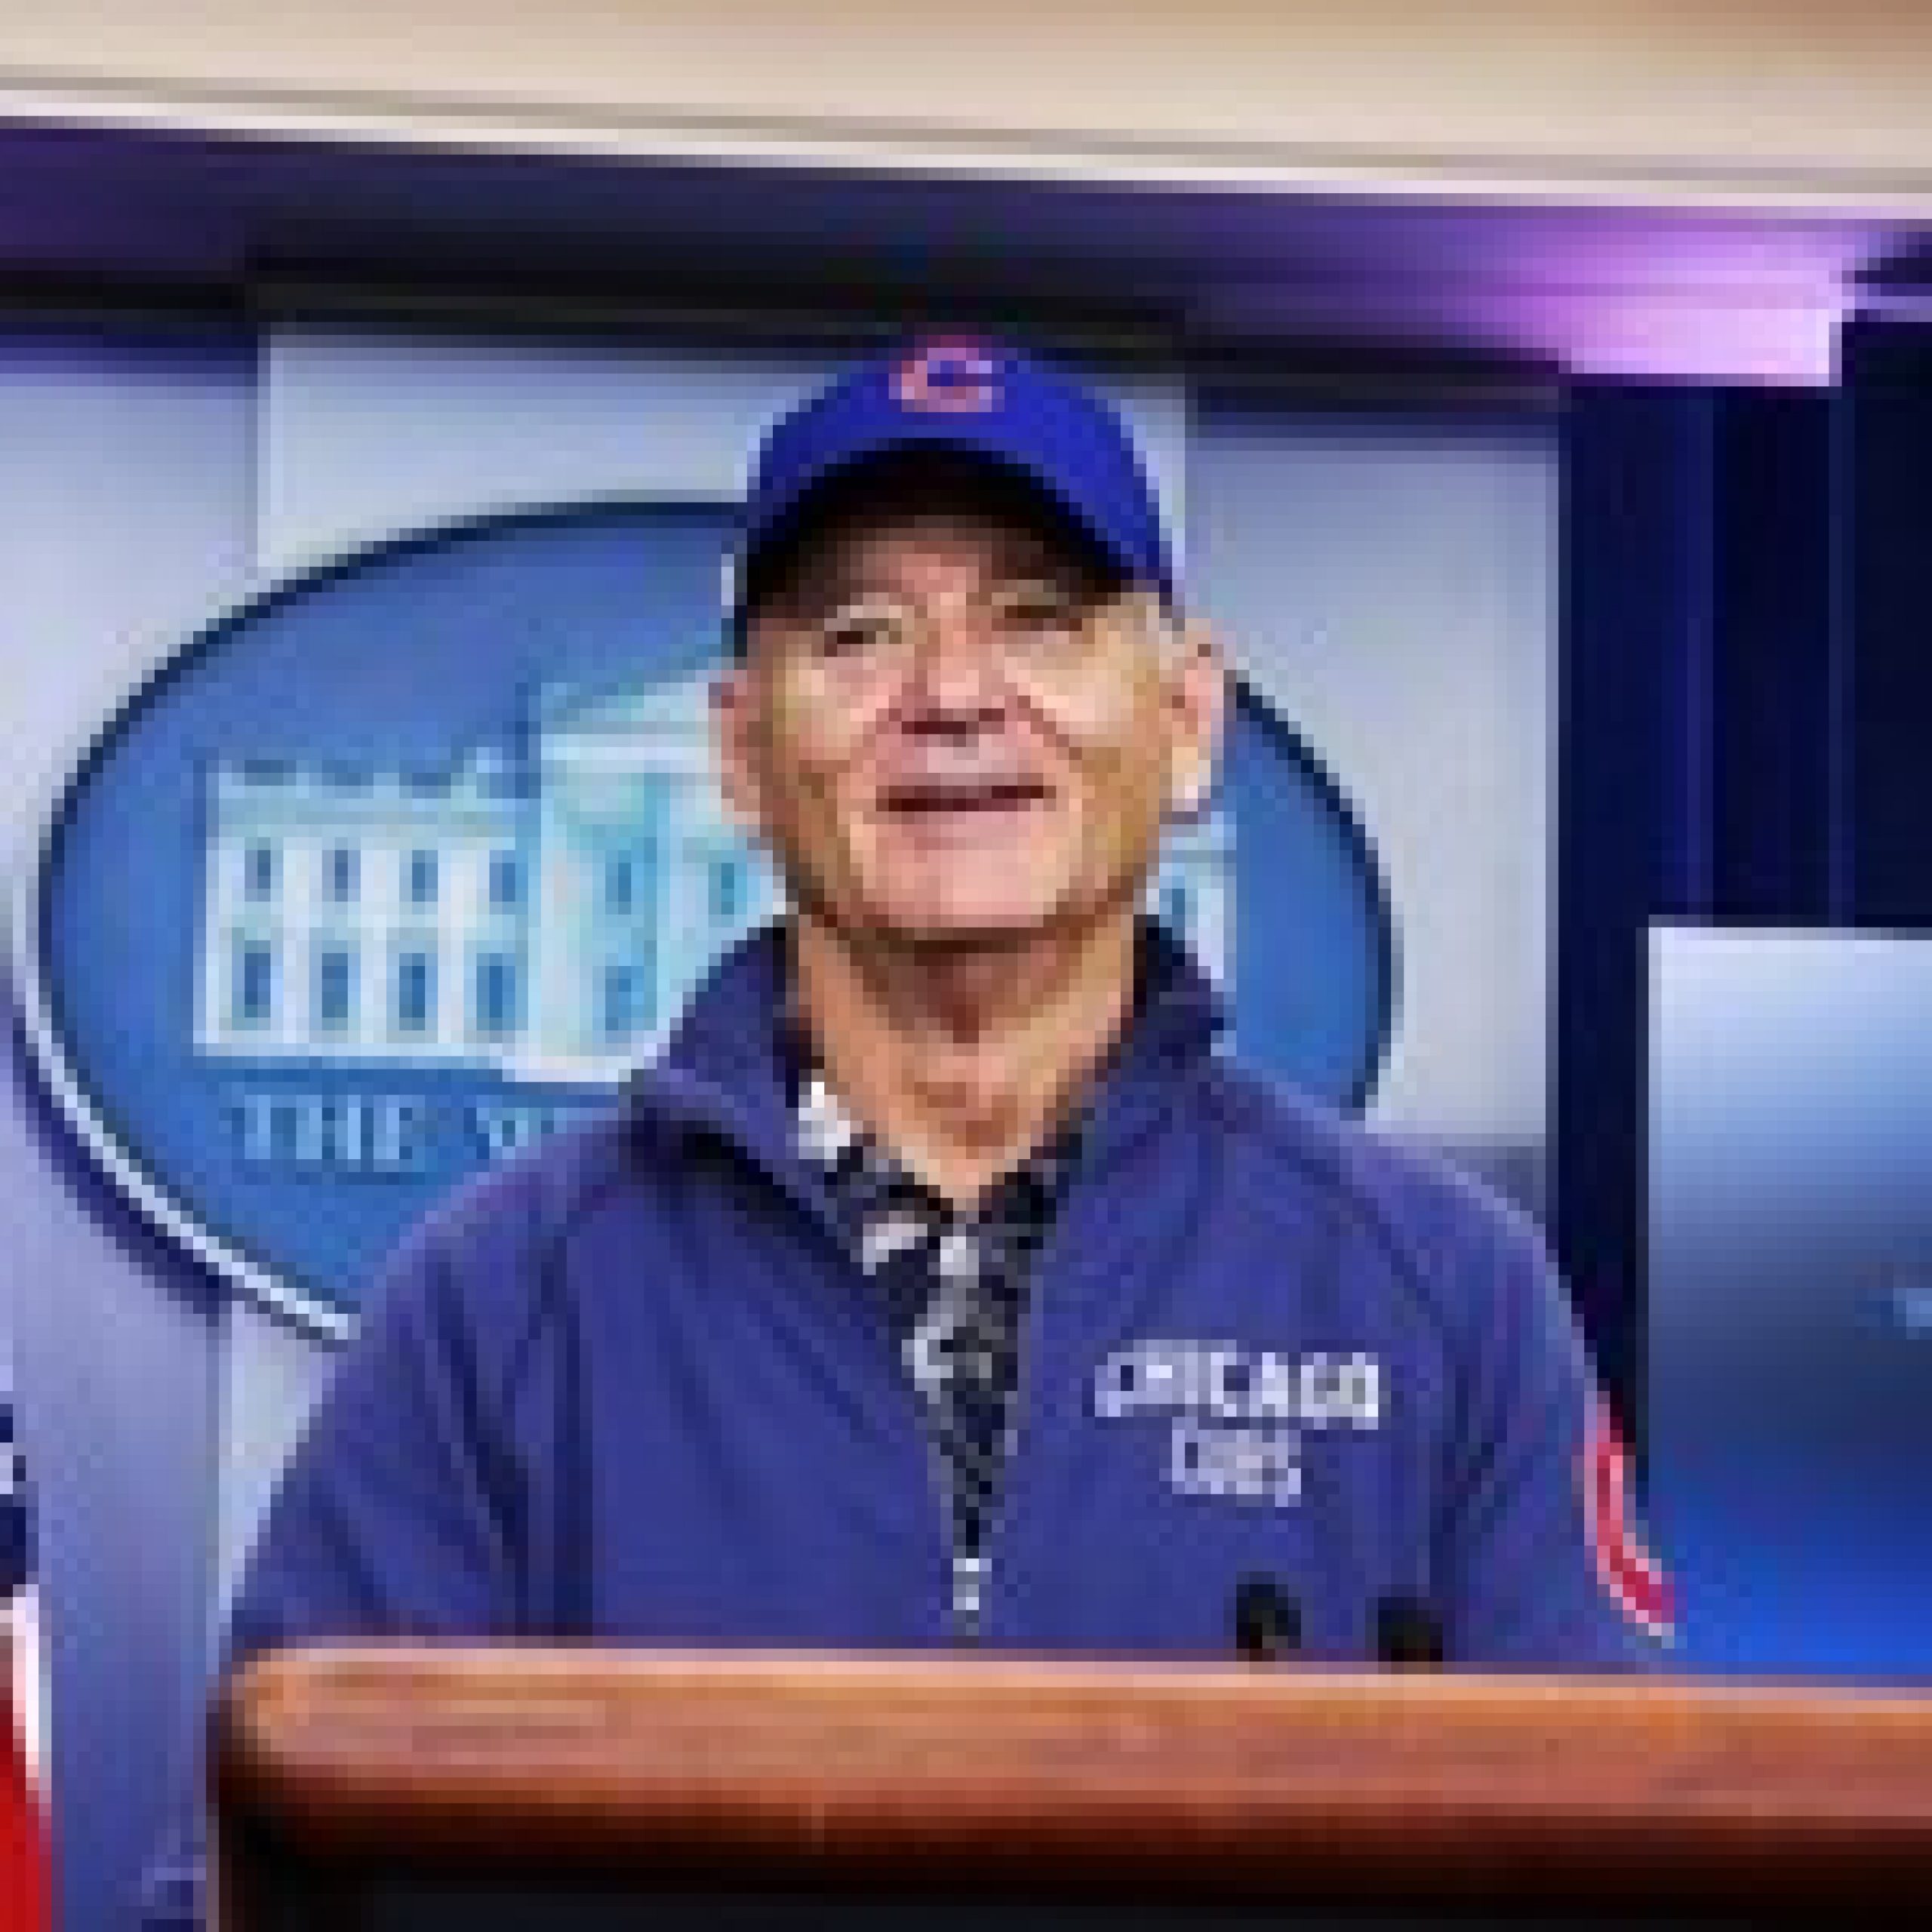 Bill Murray Welcomes Cubs Fans Back to Full Ballpark With ‘Take Me Out to the Ball Game’